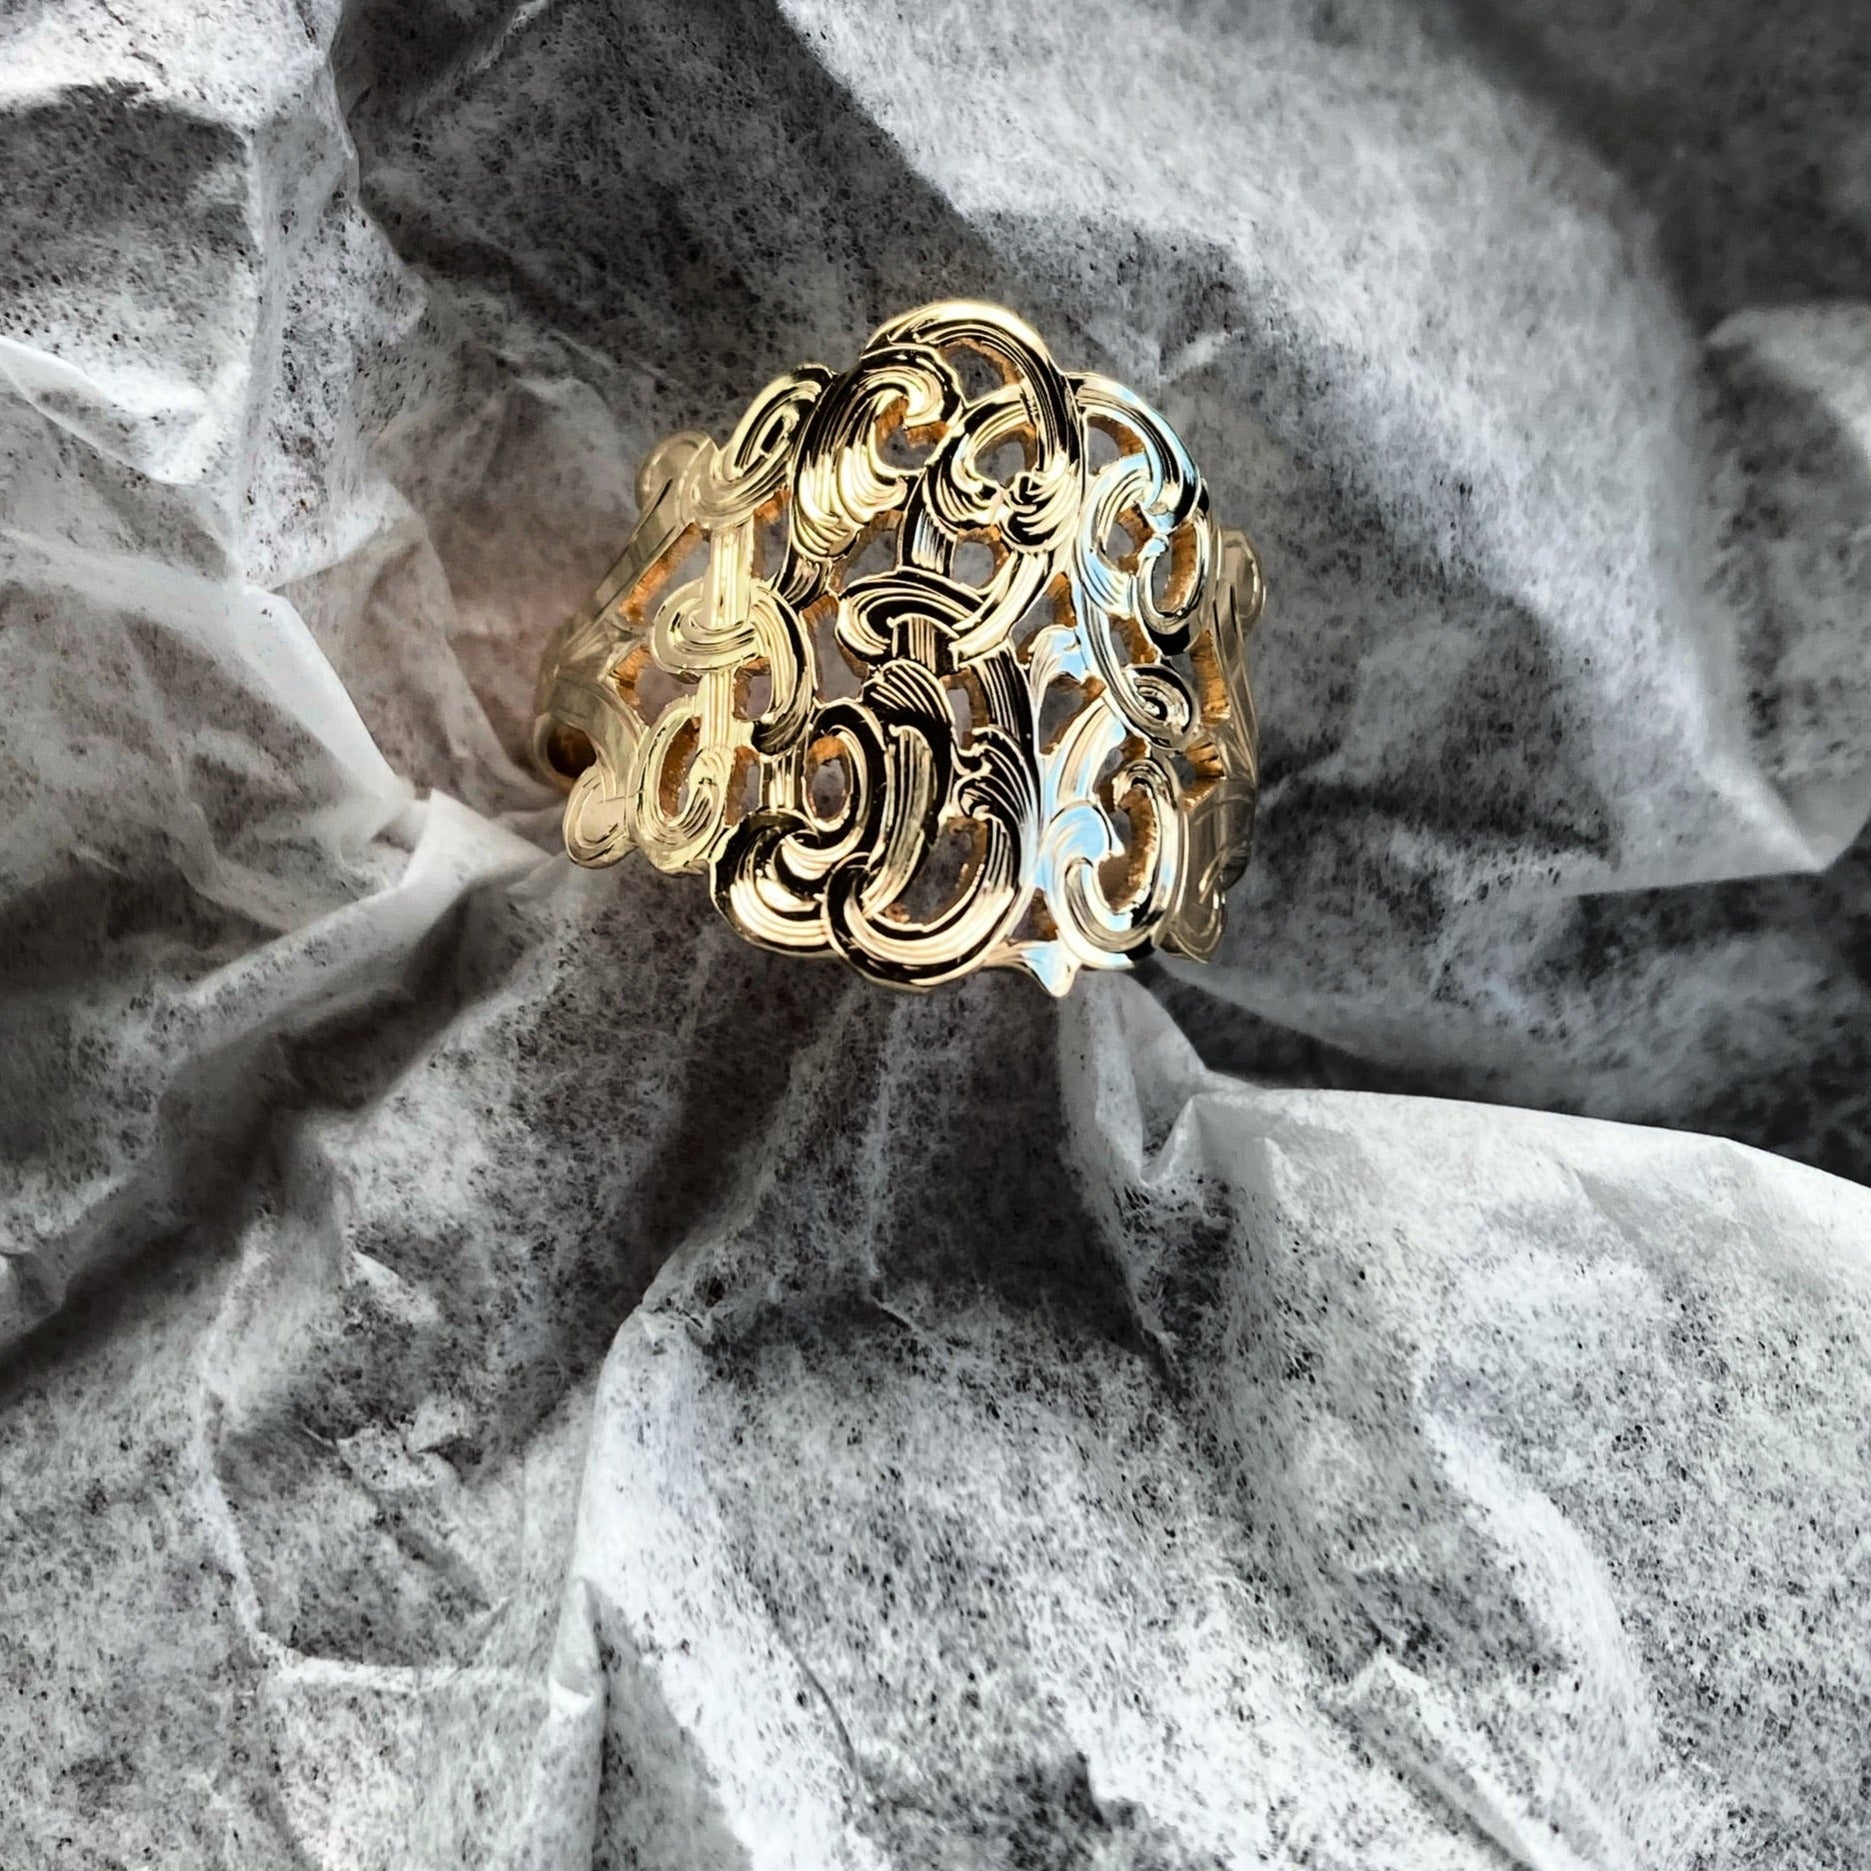 Personalized Gold Monogram Ring